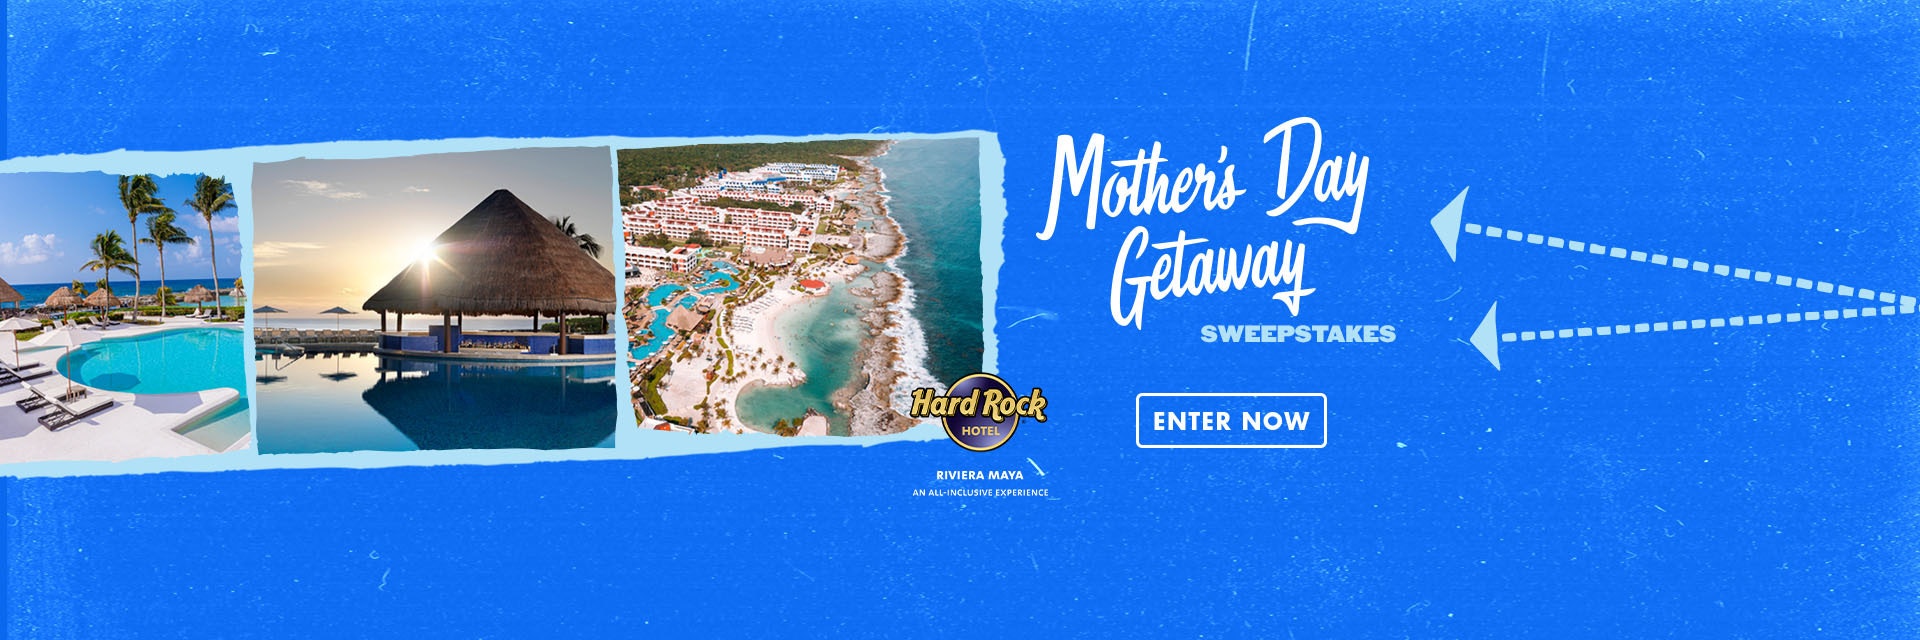 Mothers Day Sweepstakes Web FSL v1 1920x640